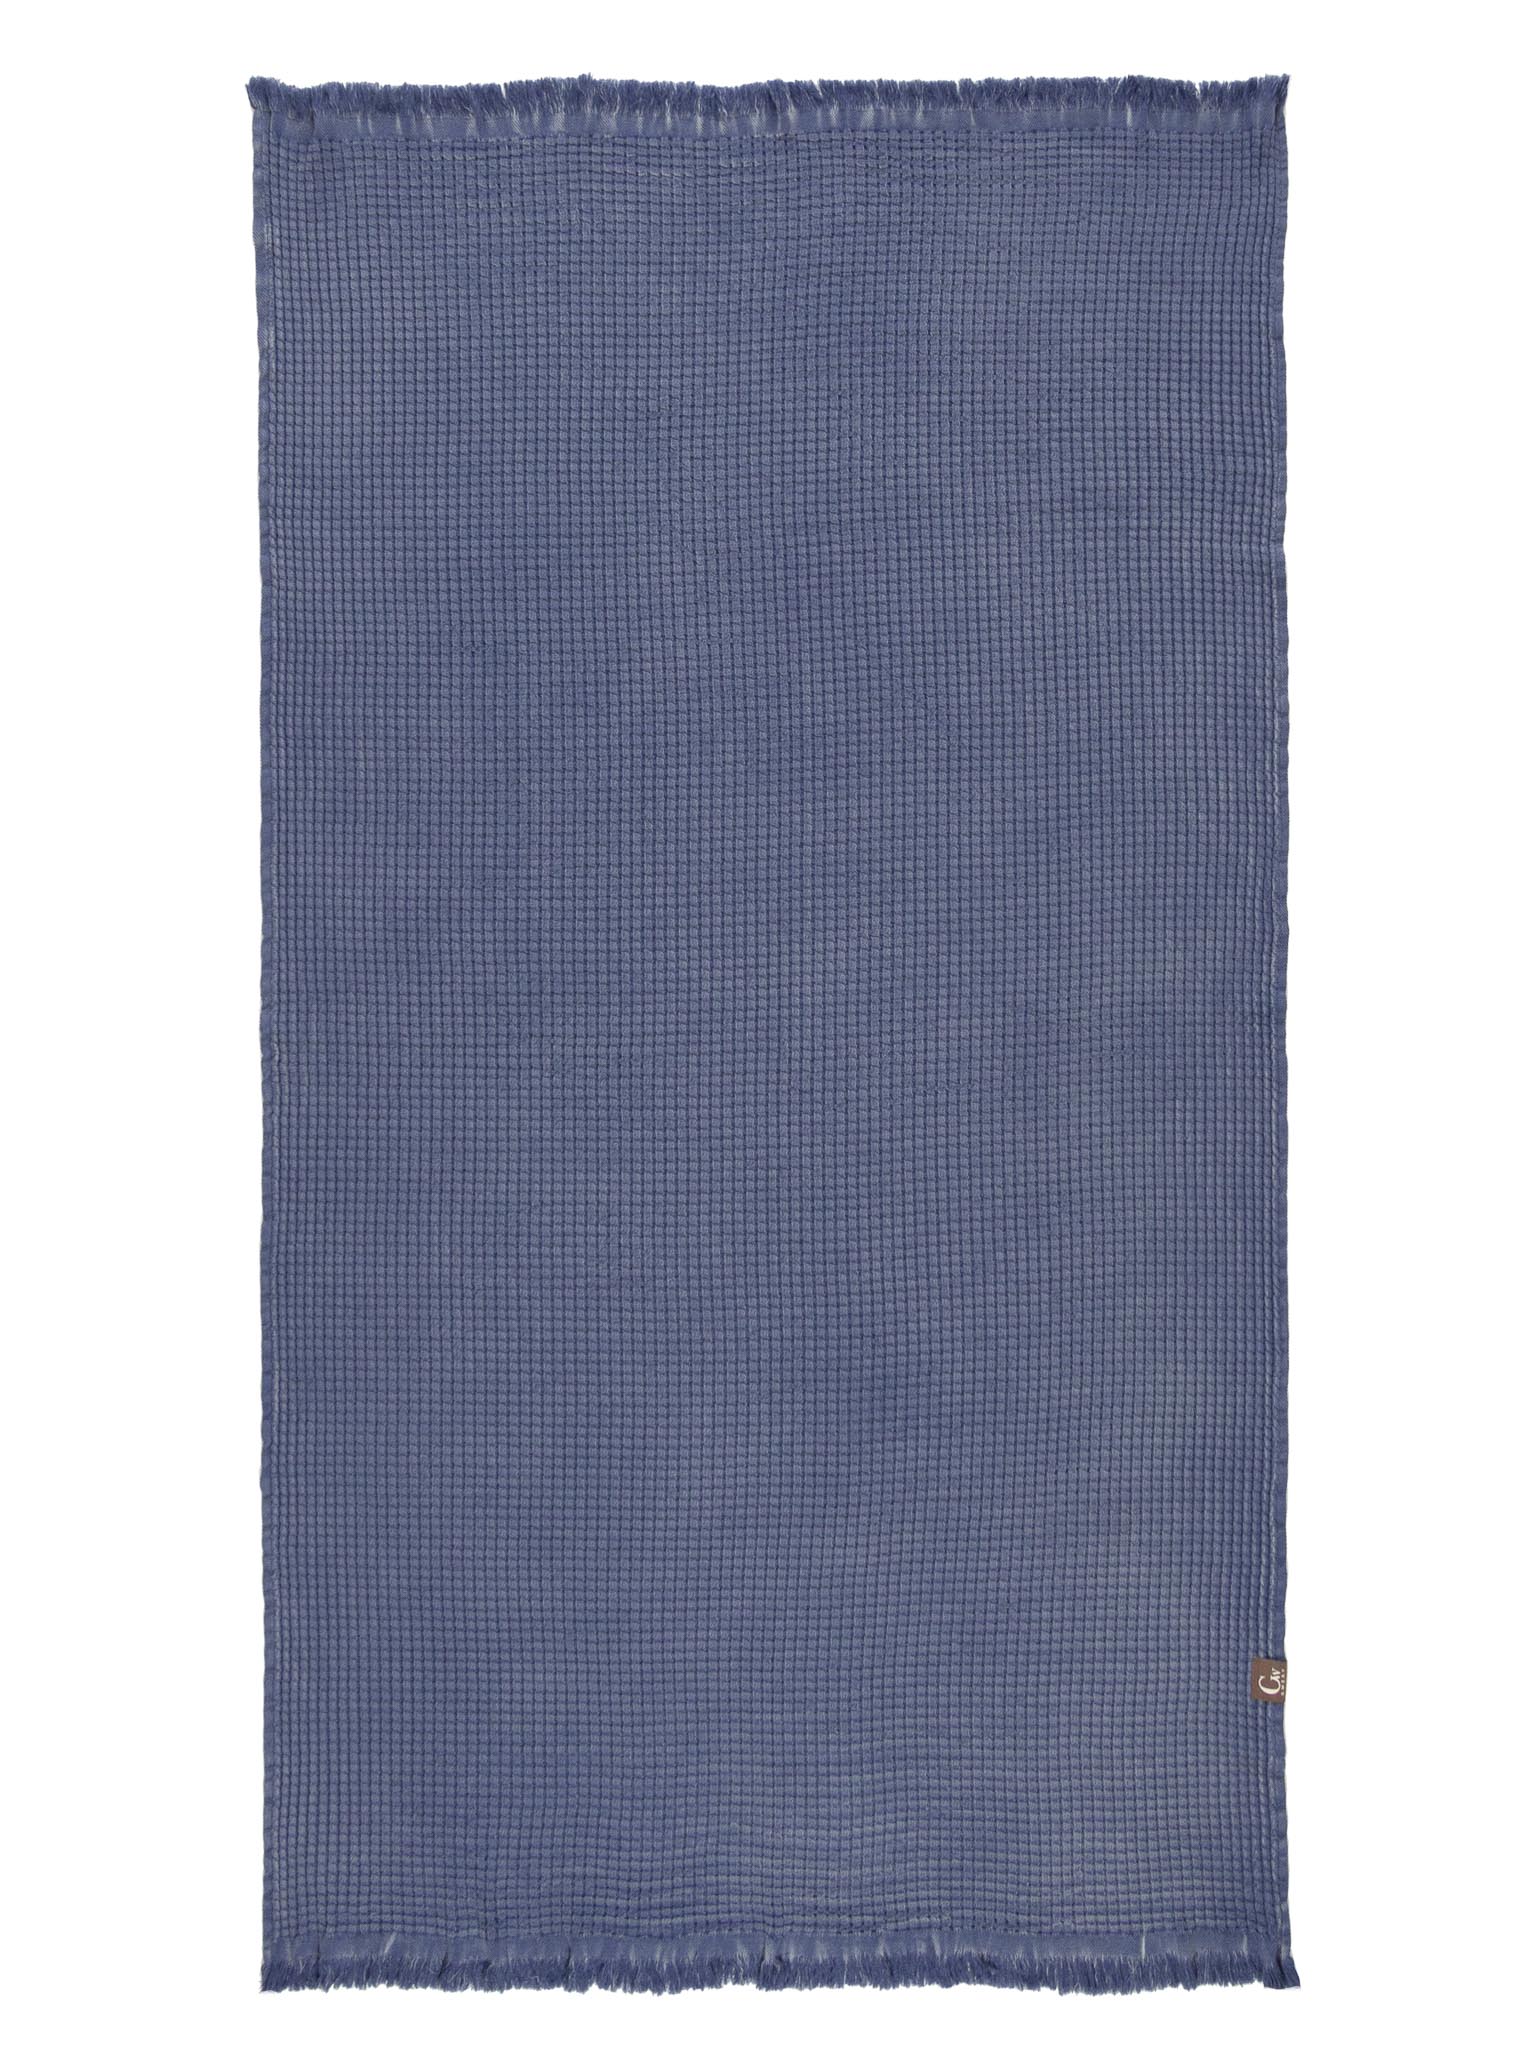 Blue double sided, honeycomb beach towel open up